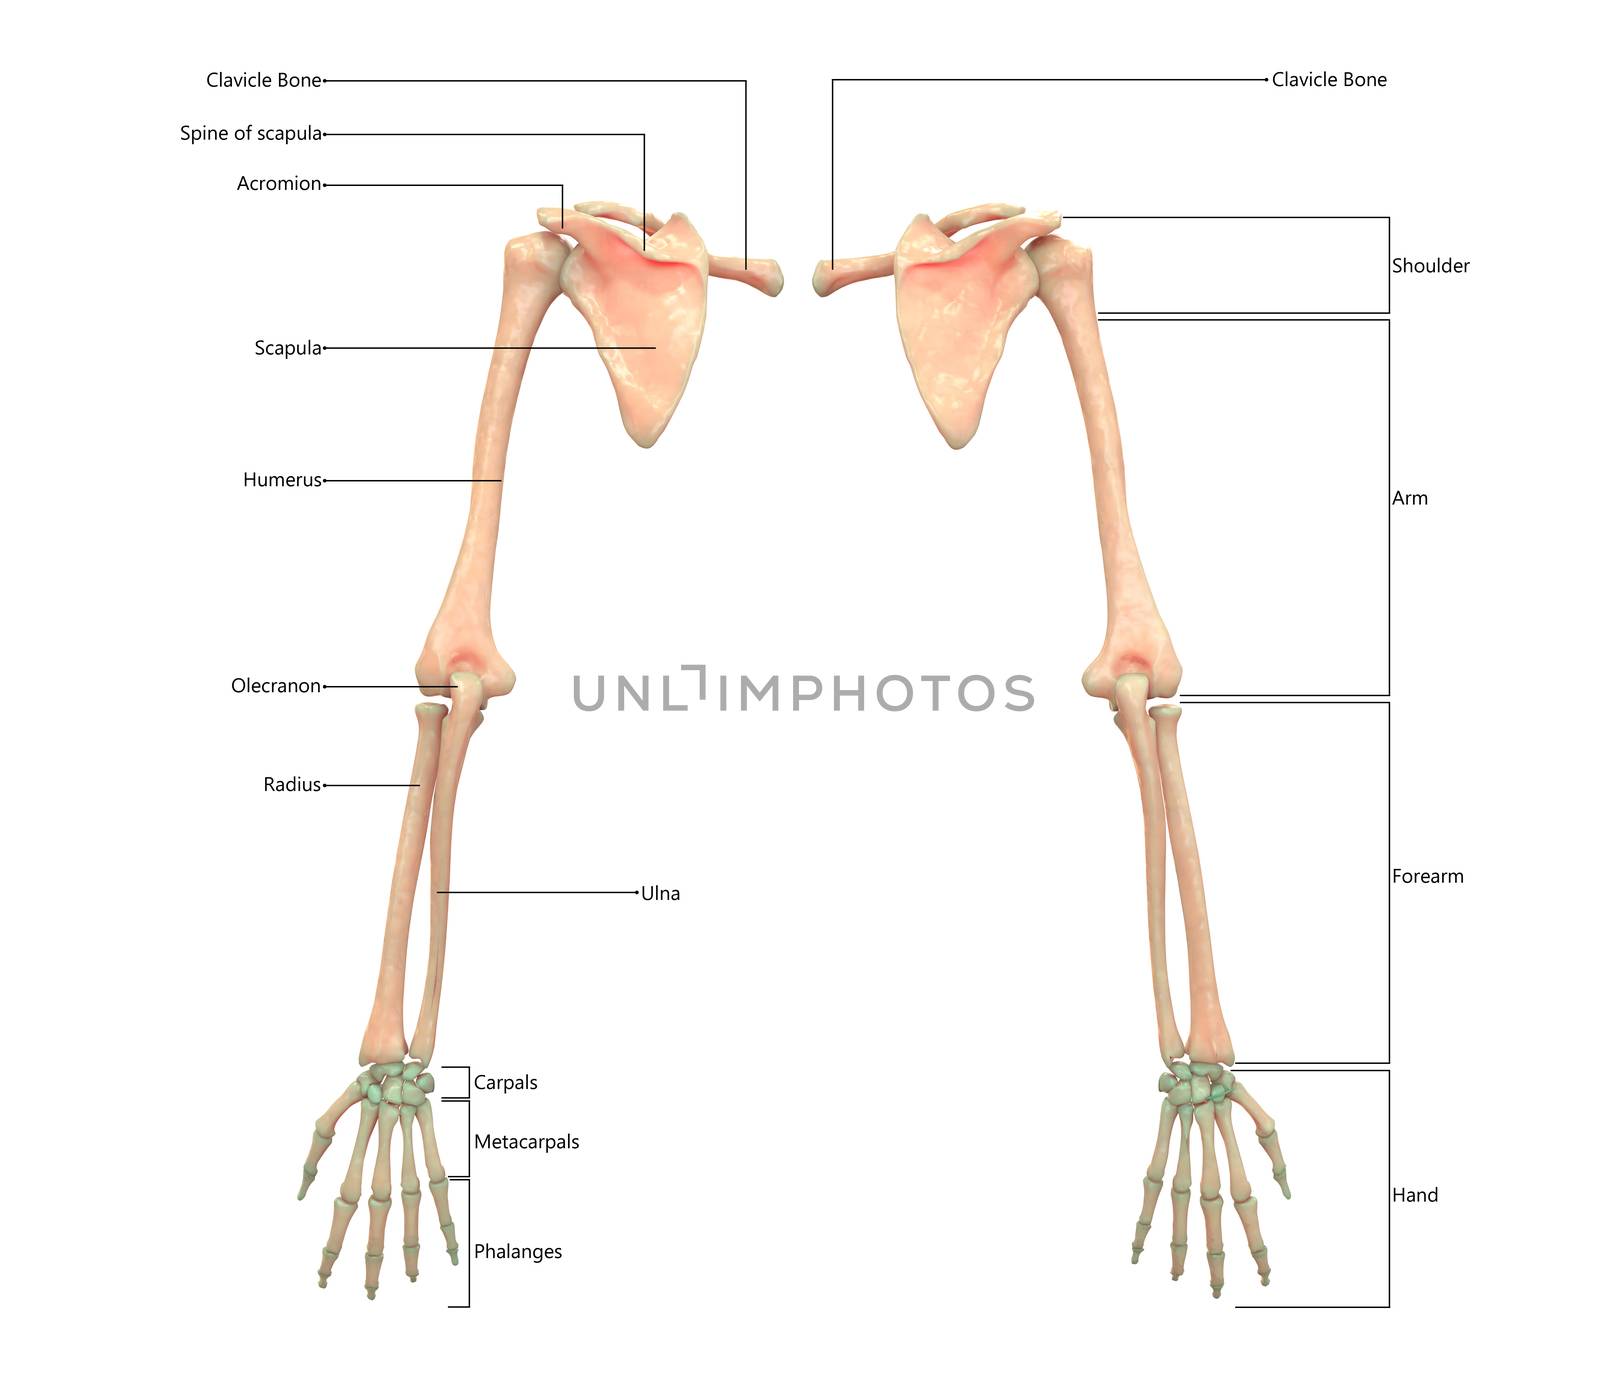 3D Illustration Concept of Human Skeleton System Upper Limbs Described with Labels Anatomy Posterior View